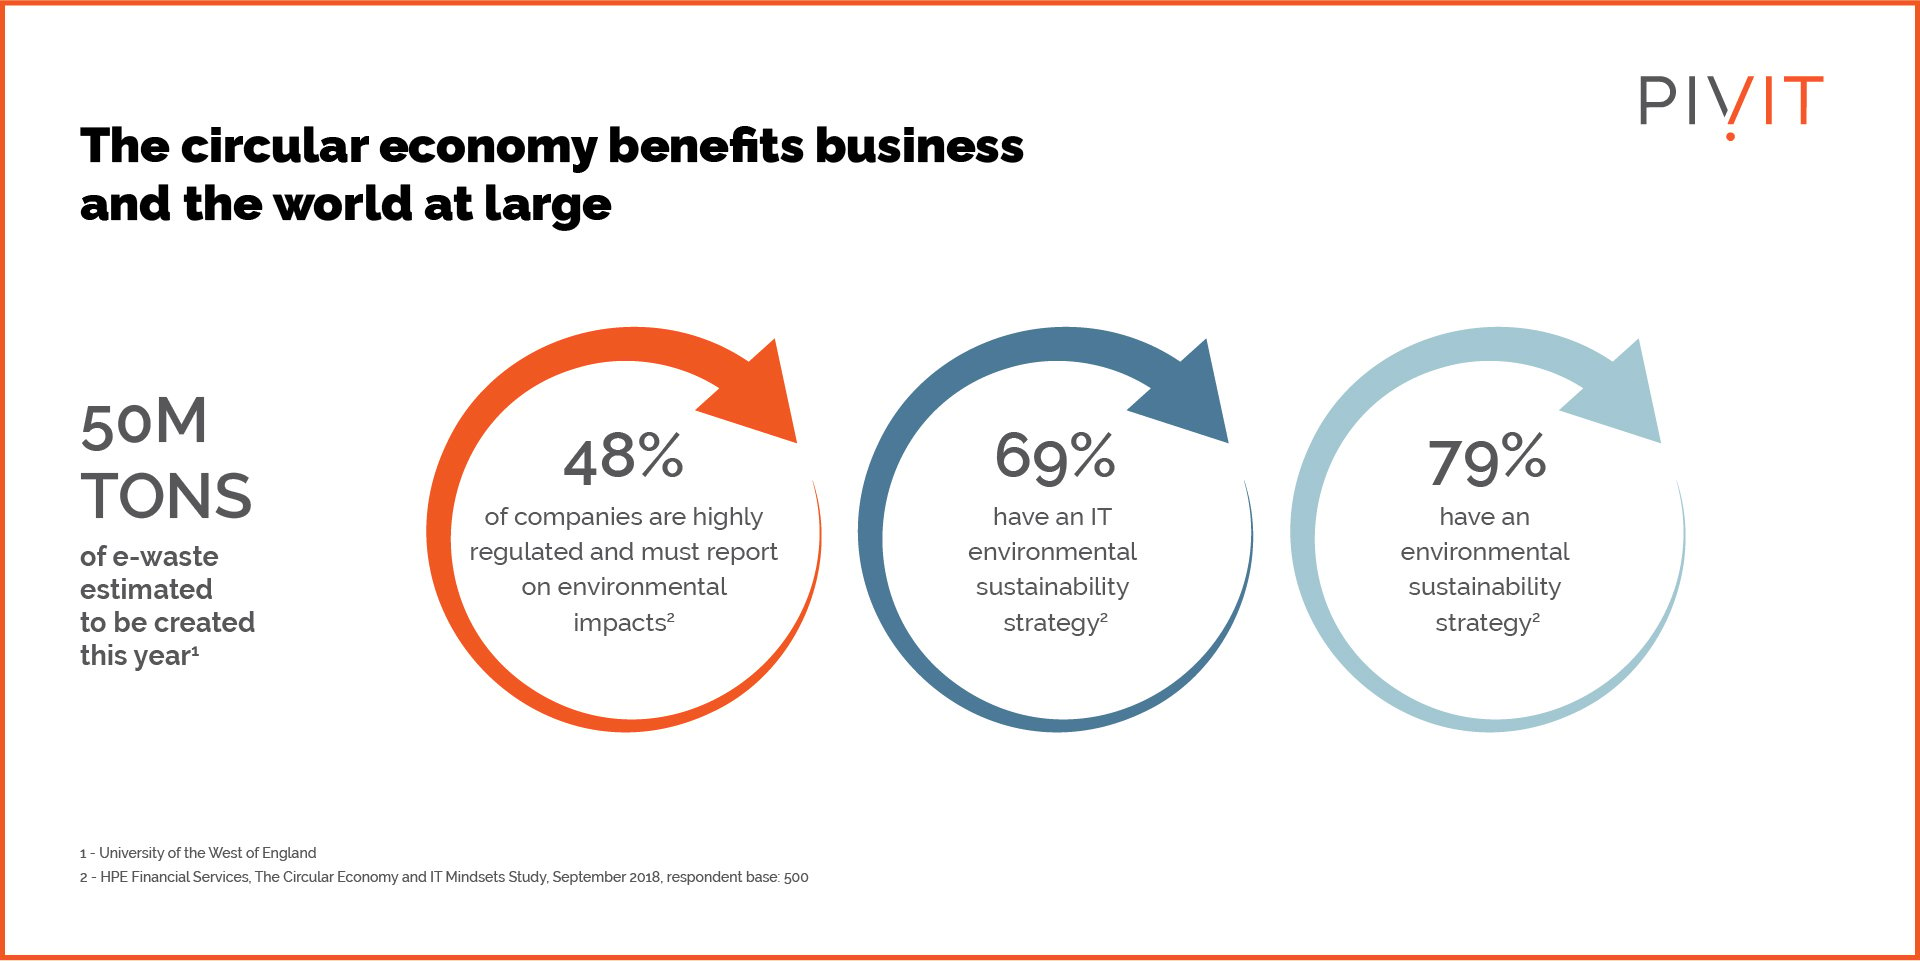 HPE statistics - the circular economy benefits business and the world at large